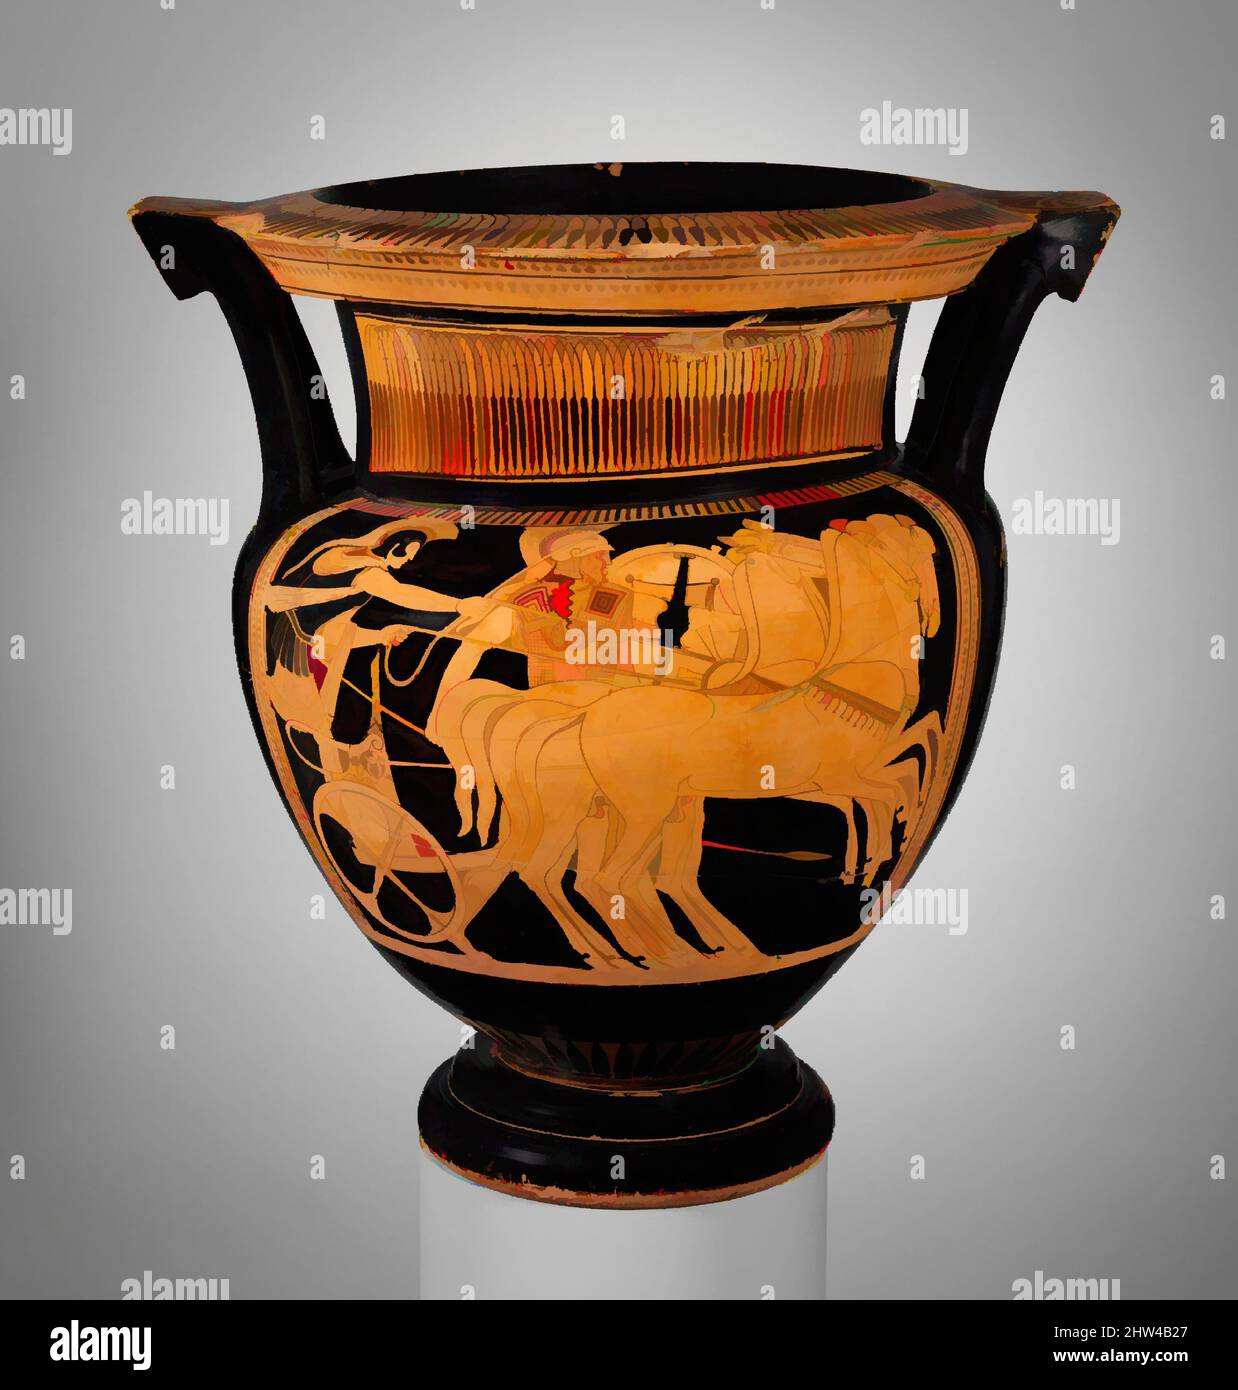 Art inspired by Terracotta column-krater (bowl for mixing wine and water), Classical, ca. 460 B.C., Greek, Attic, Terracotta; red-figure, H. 17 13/16 in. (45.2 cm), Vases, Obverse, warrior and quadriga (four-horse chariot) with driver, Reverse, Dionysos and two maenads. The scene on, Classic works modernized by Artotop with a splash of modernity. Shapes, color and value, eye-catching visual impact on art. Emotions through freedom of artworks in a contemporary way. A timeless message pursuing a wildly creative new direction. Artists turning to the digital medium and creating the Artotop NFT Stock Photo